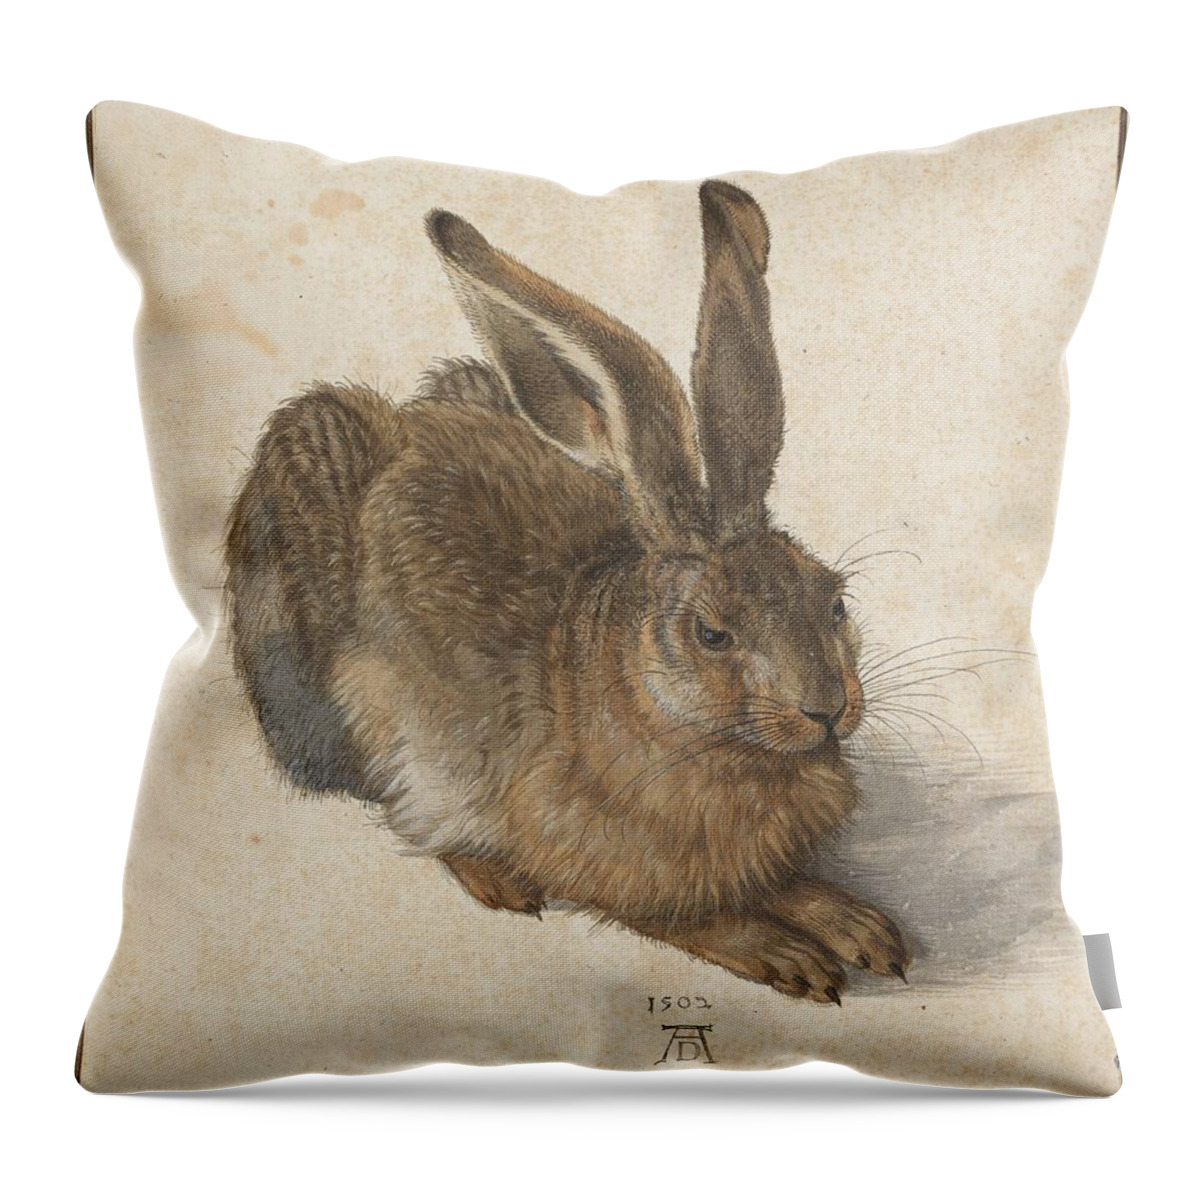 Durer Hare Throw Pillow featuring the painting Young Hare by Albrecht Durer